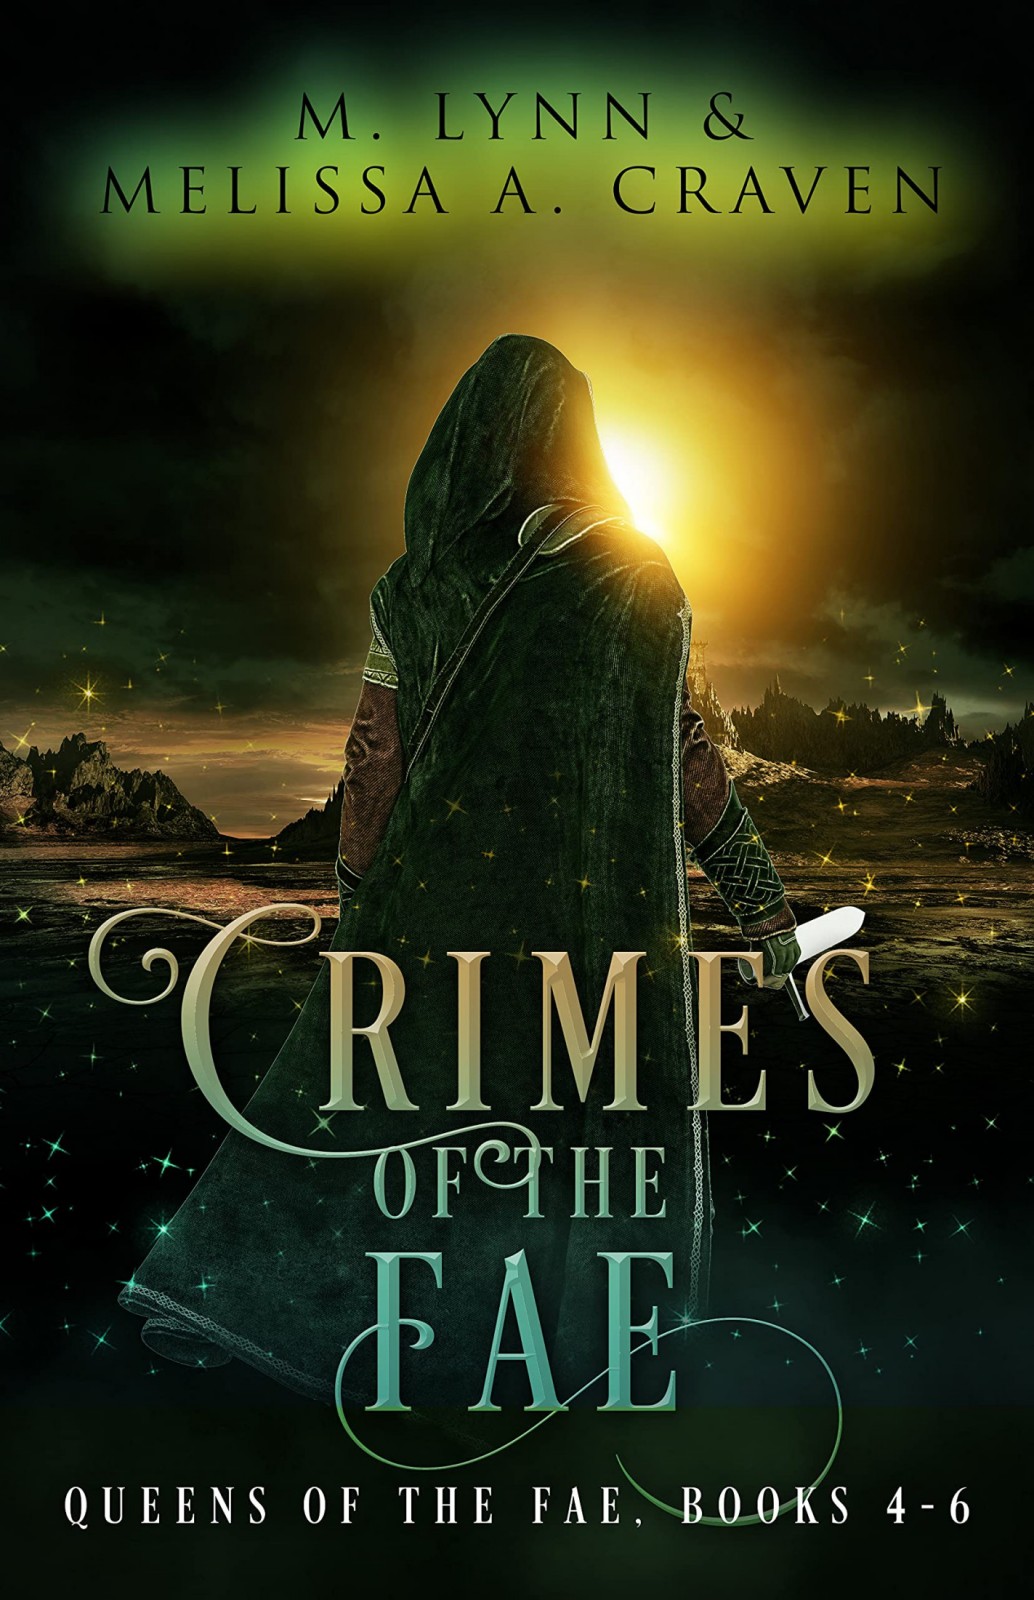 Crimes of the Fae: Queens of the Fae Books 4-6